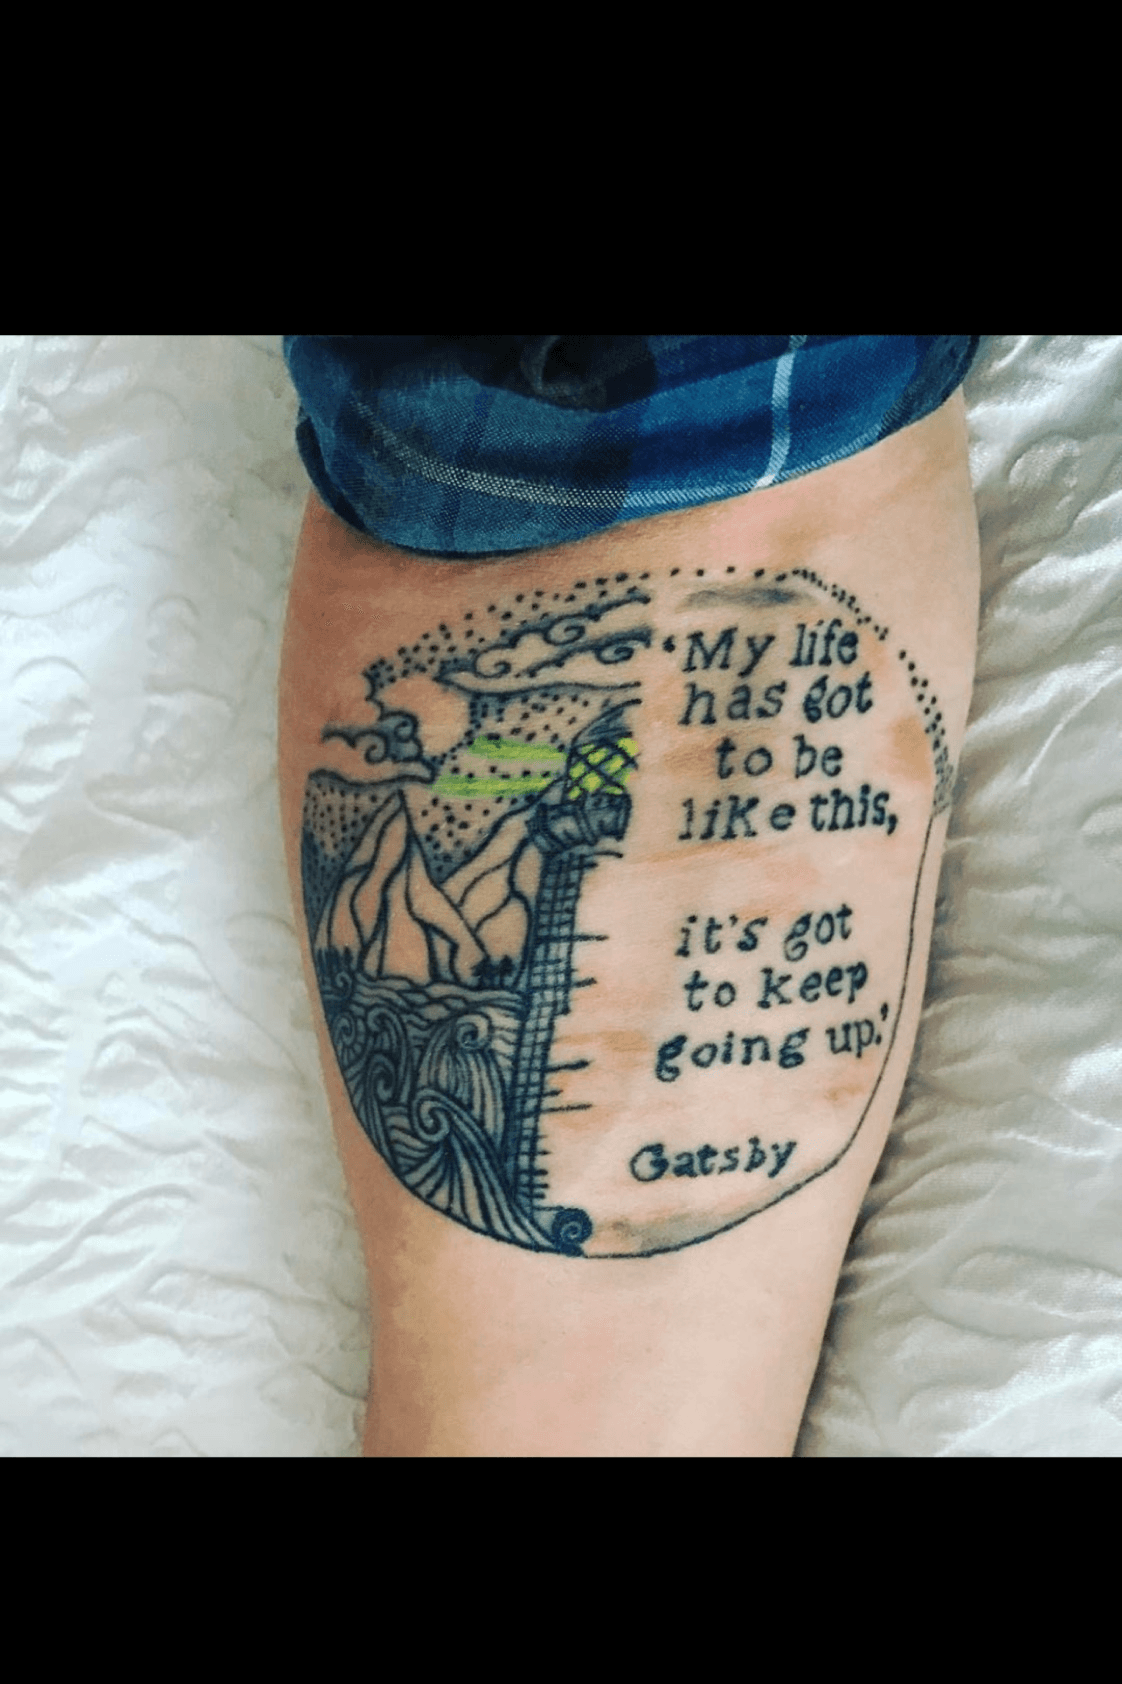 the green light in the great gatsby tattoo